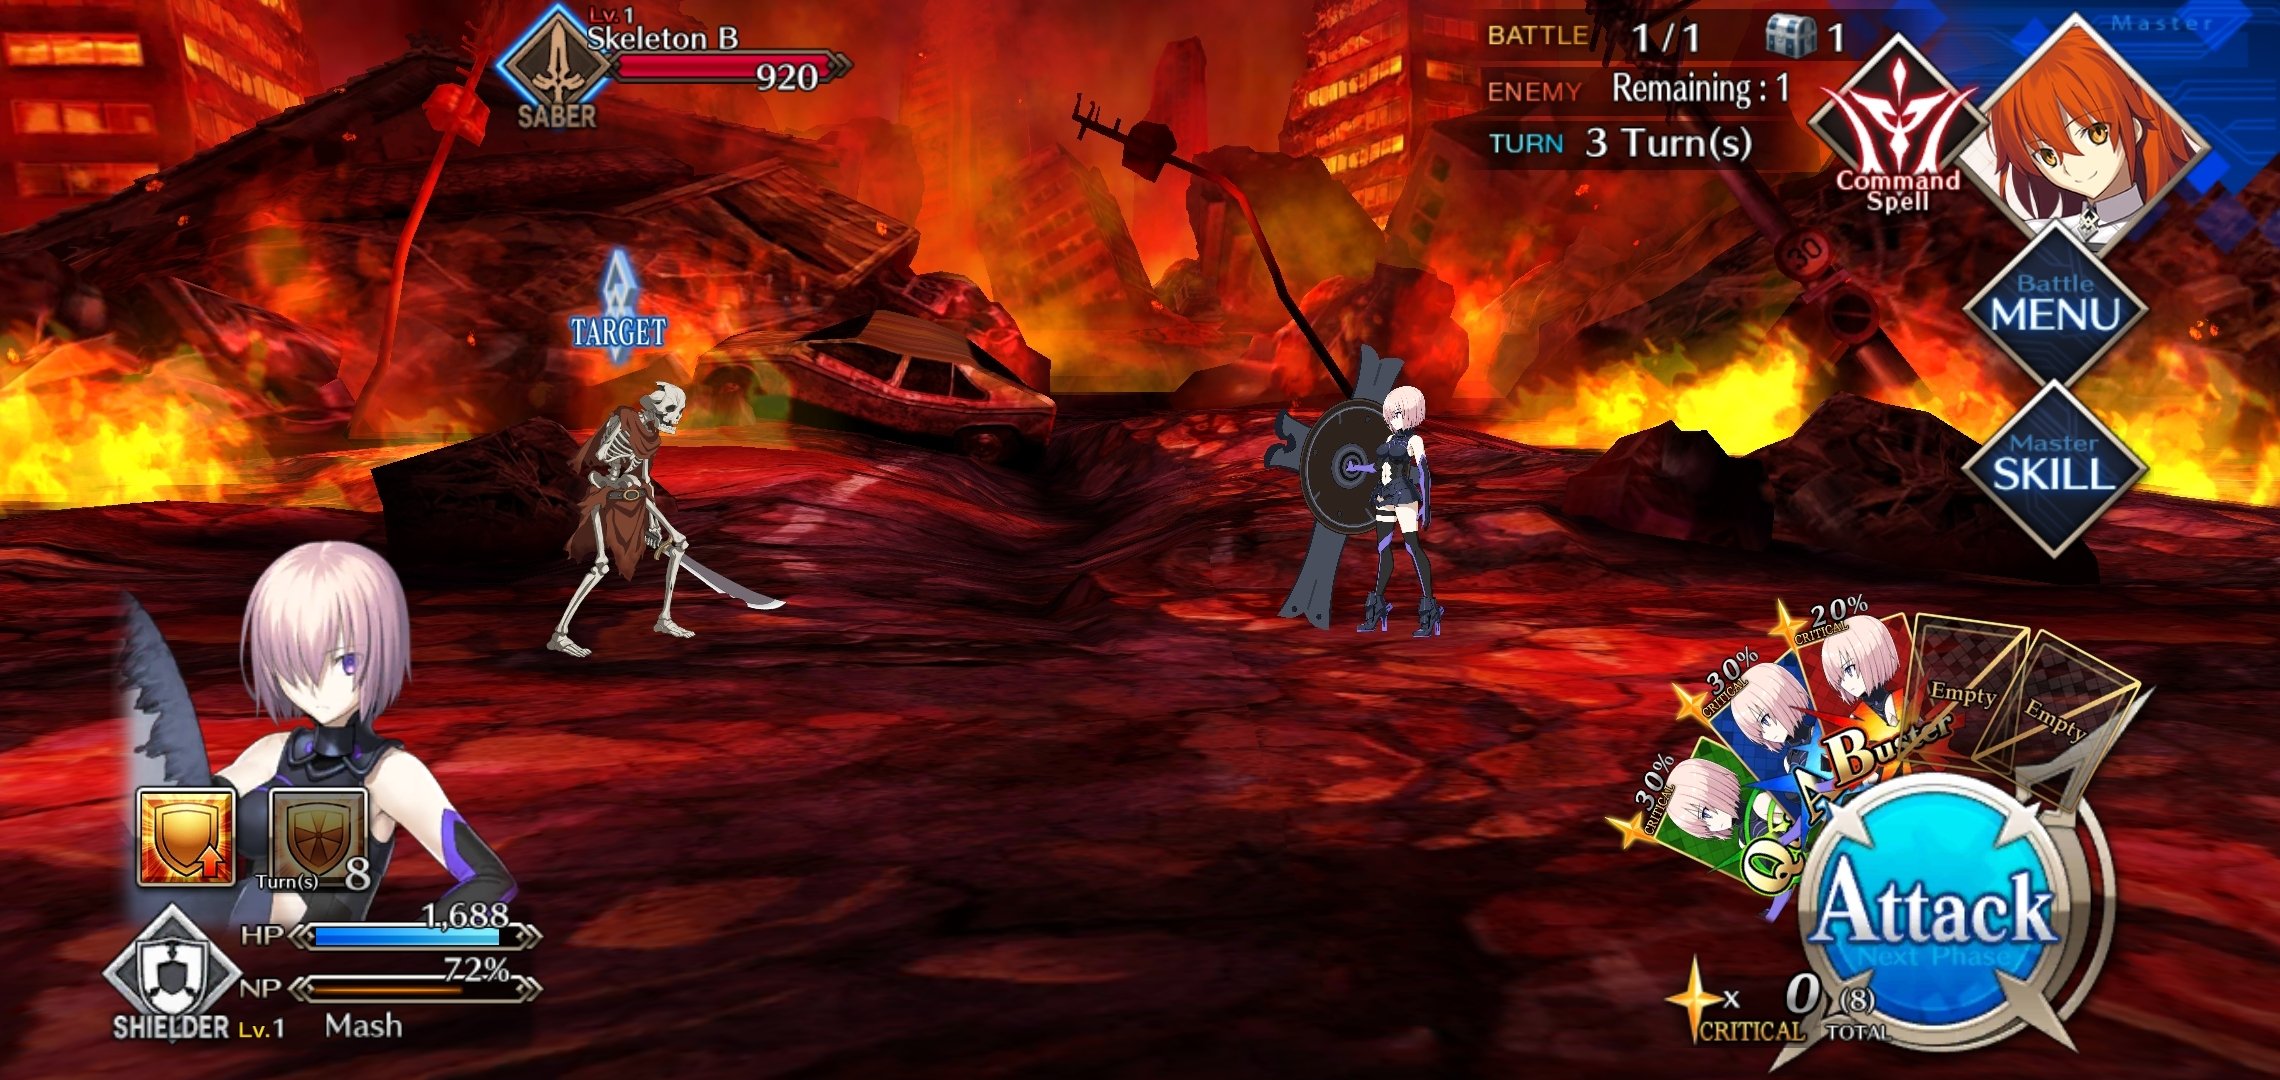 Fate Grand Order 2 6 0 Download For Android Apk Free